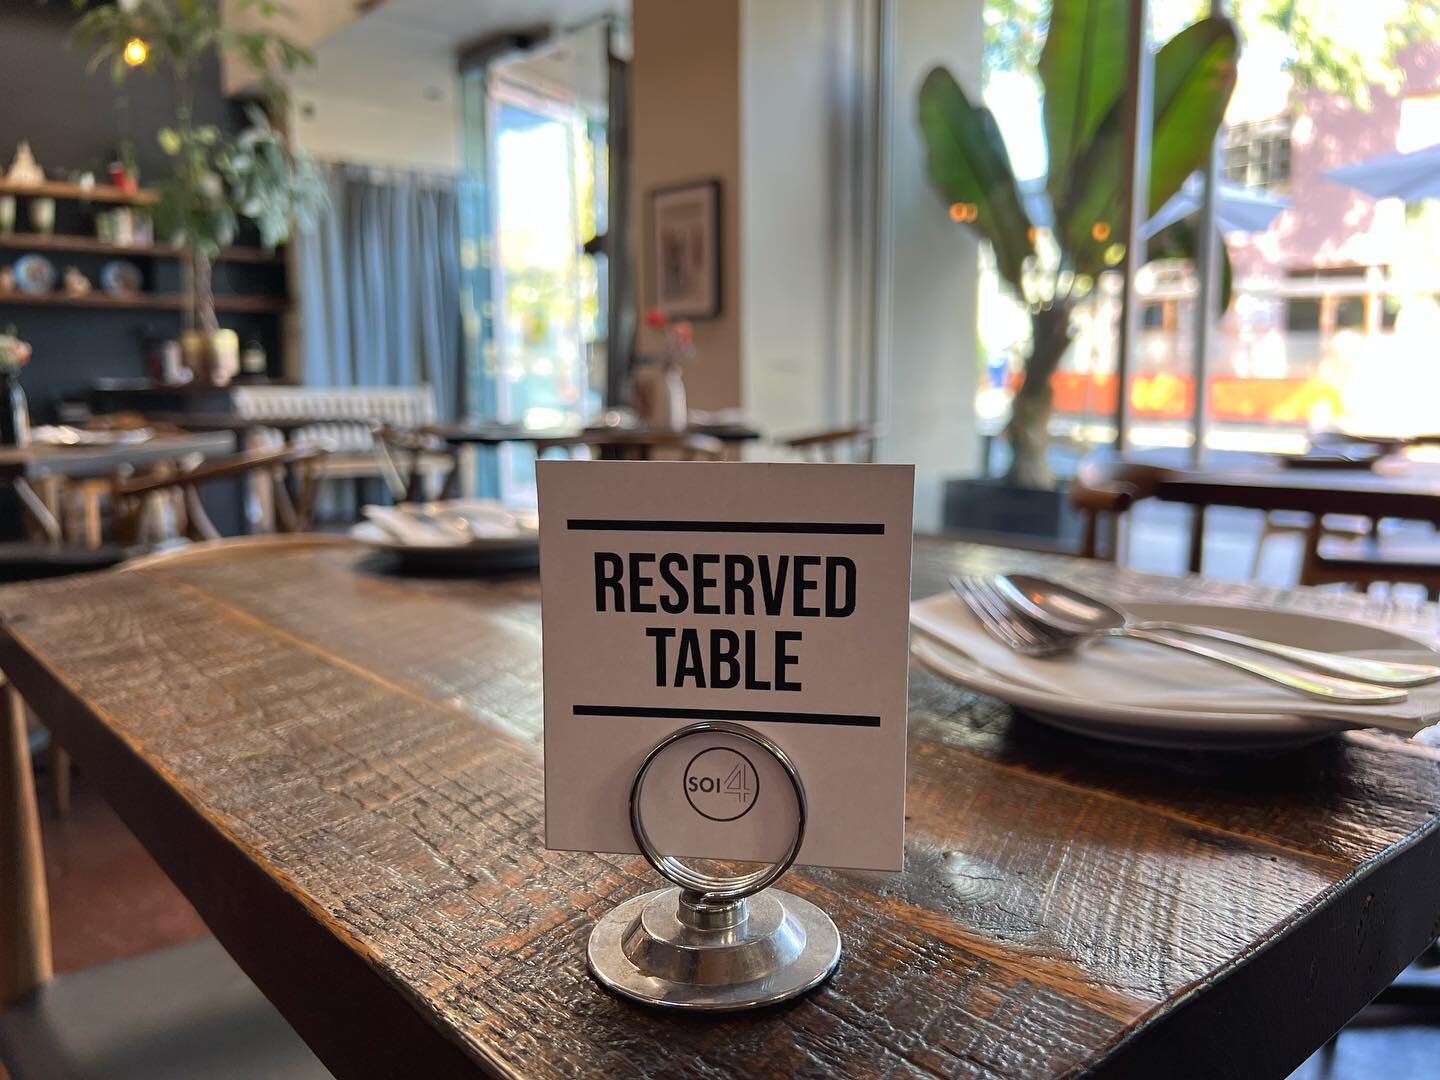 skip the wait,
get your &lsquo;Reserved Table&rsquo; 
thru RESY or our website. 

👉🏻 https://bit.ly/3xi7Yem